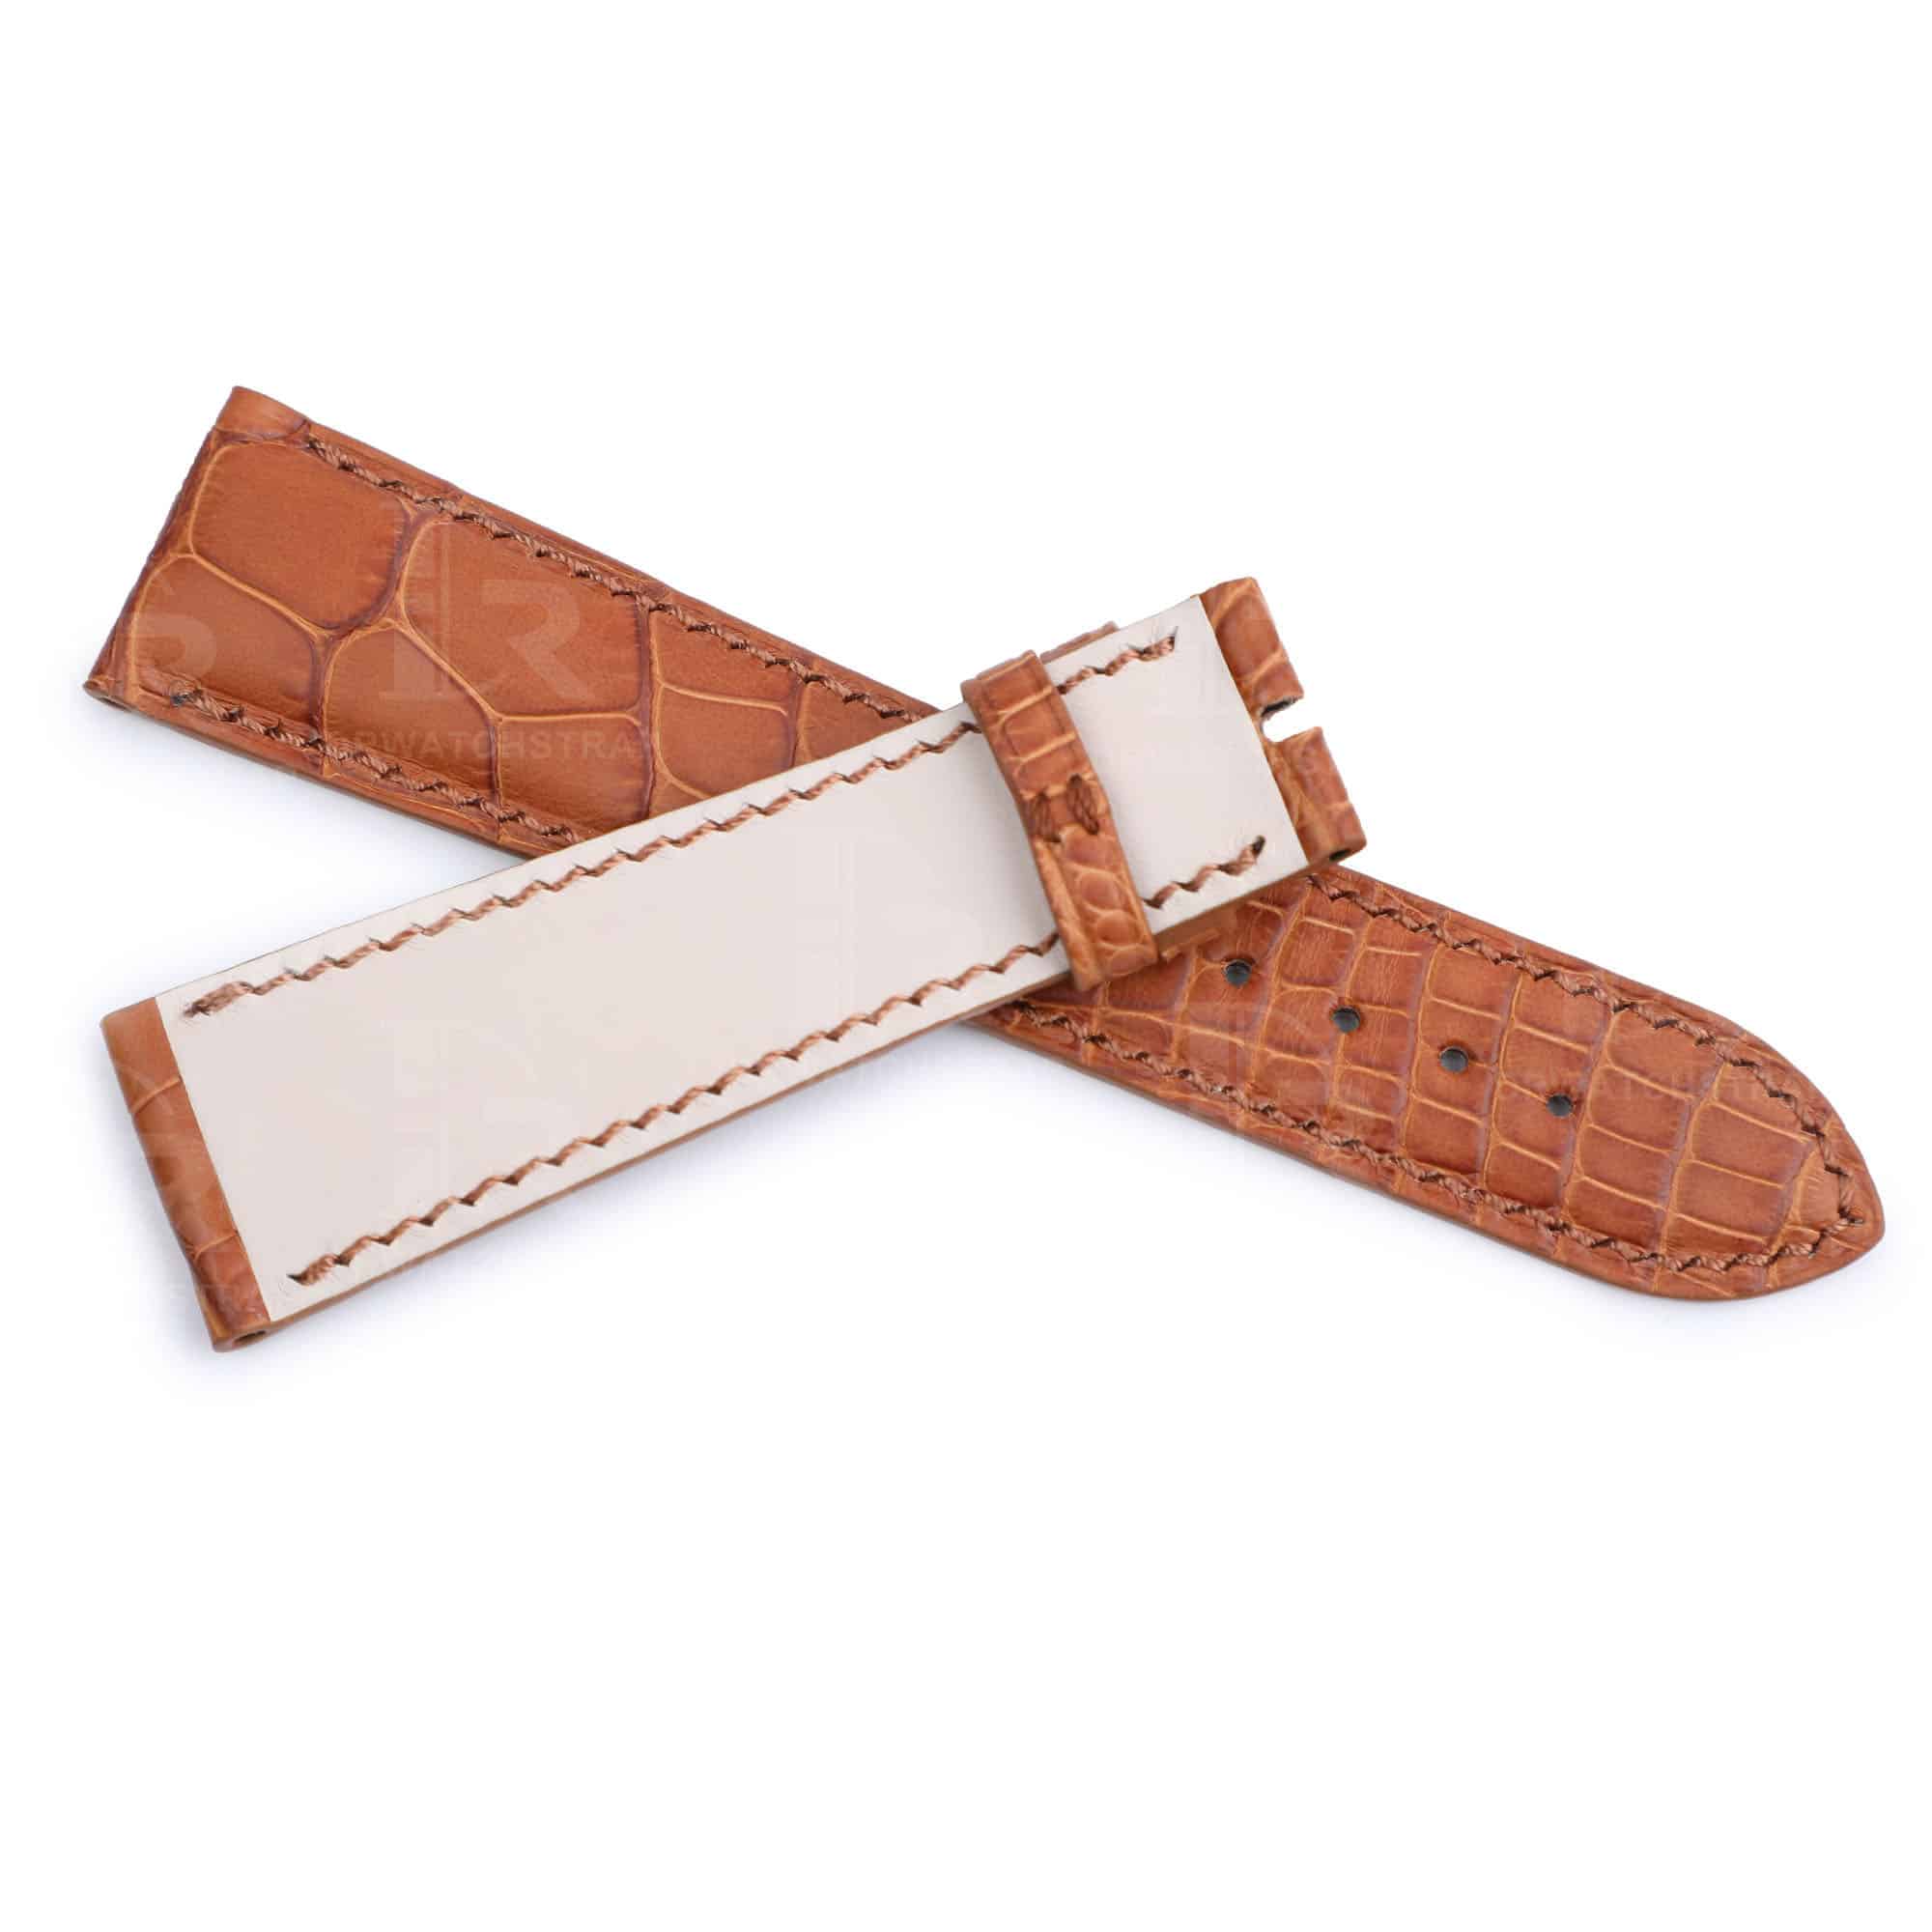 Custom handmade replacement Belly-Scale brown alligator watch bands for Chopard L.U.C leather strap